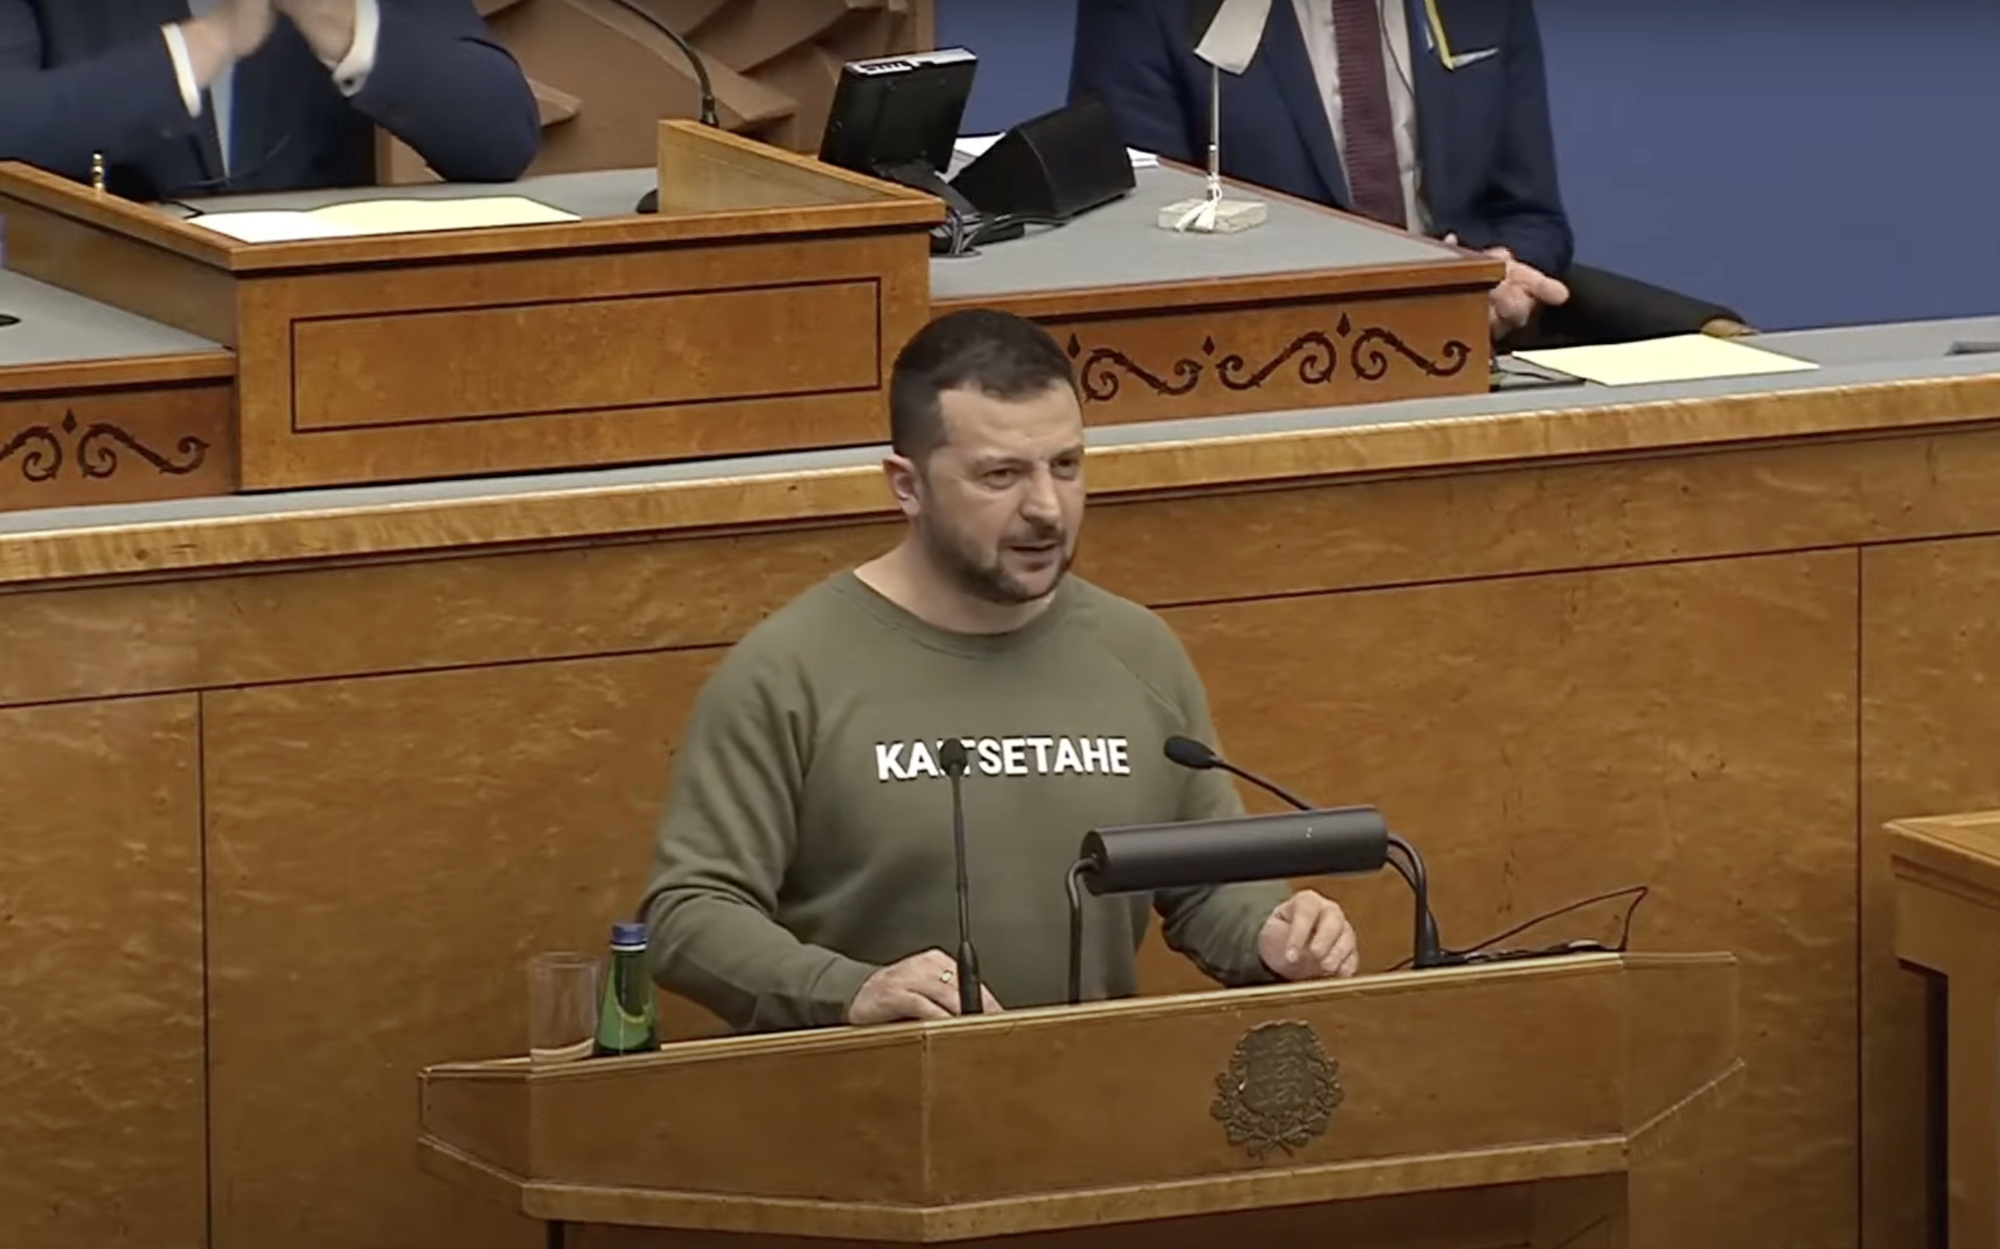 Estonian Prime Minister presented Zelenskyy with a sweatshirt with a symbolic inscription for Ukrainians: what kaitsetahe means